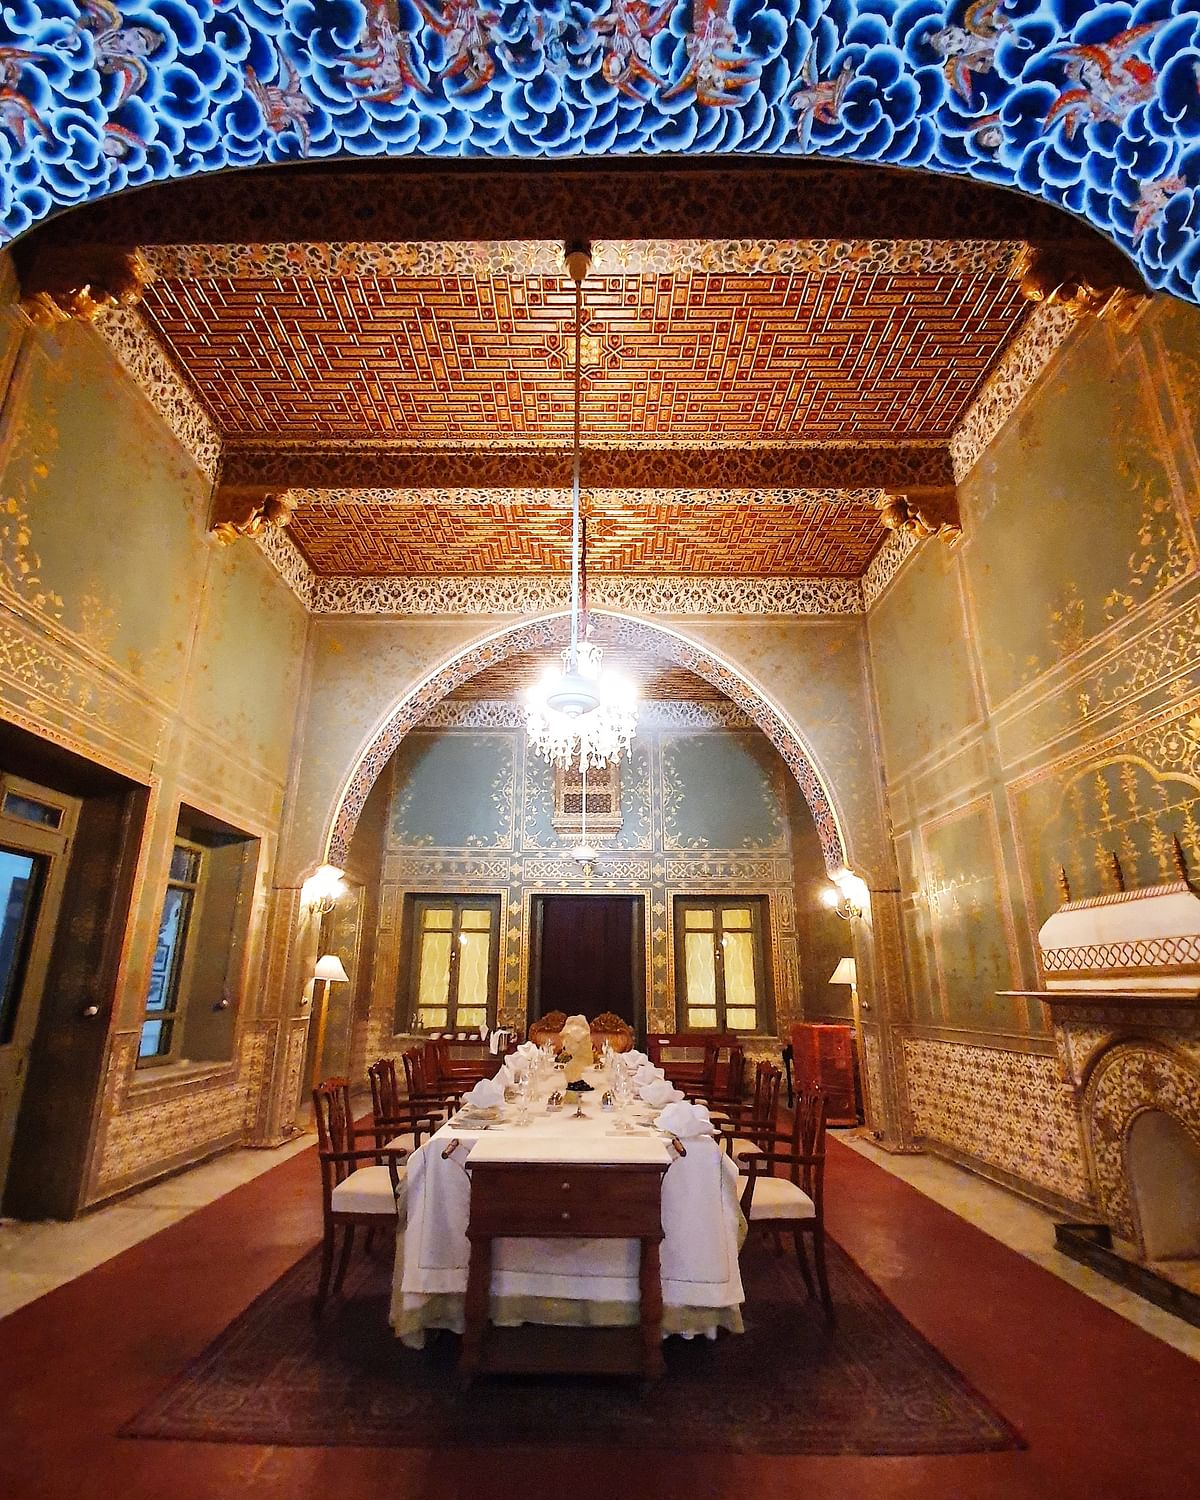 Every meal was a pleasant surprise – like Bikaner itself, an underrated destination that never stops surprising.